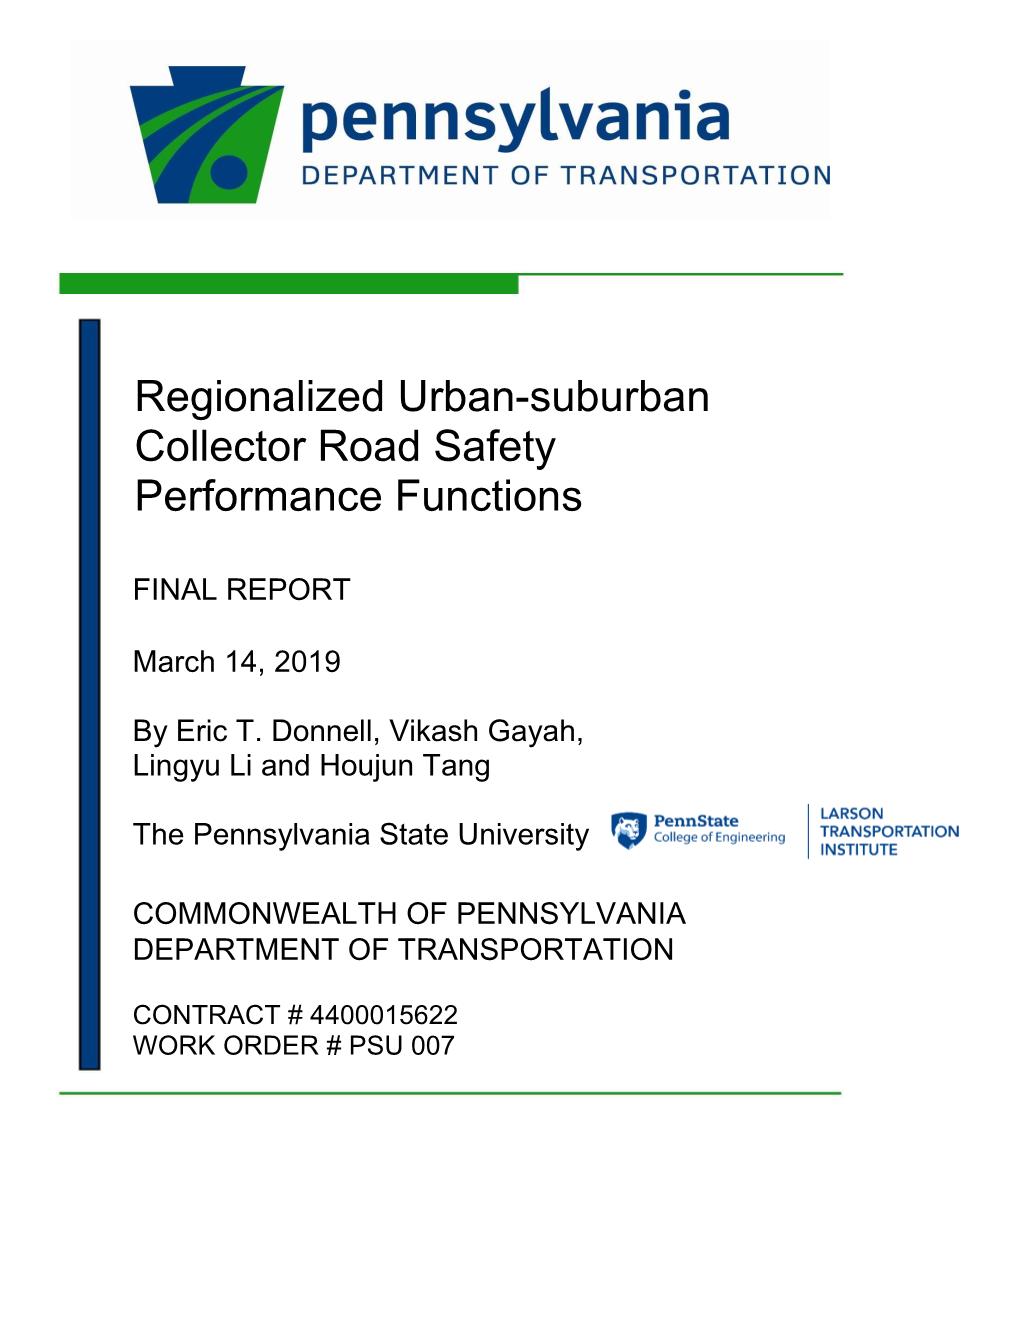 Regionalized Urban-Suburban Collector Road Safety Performance Functions